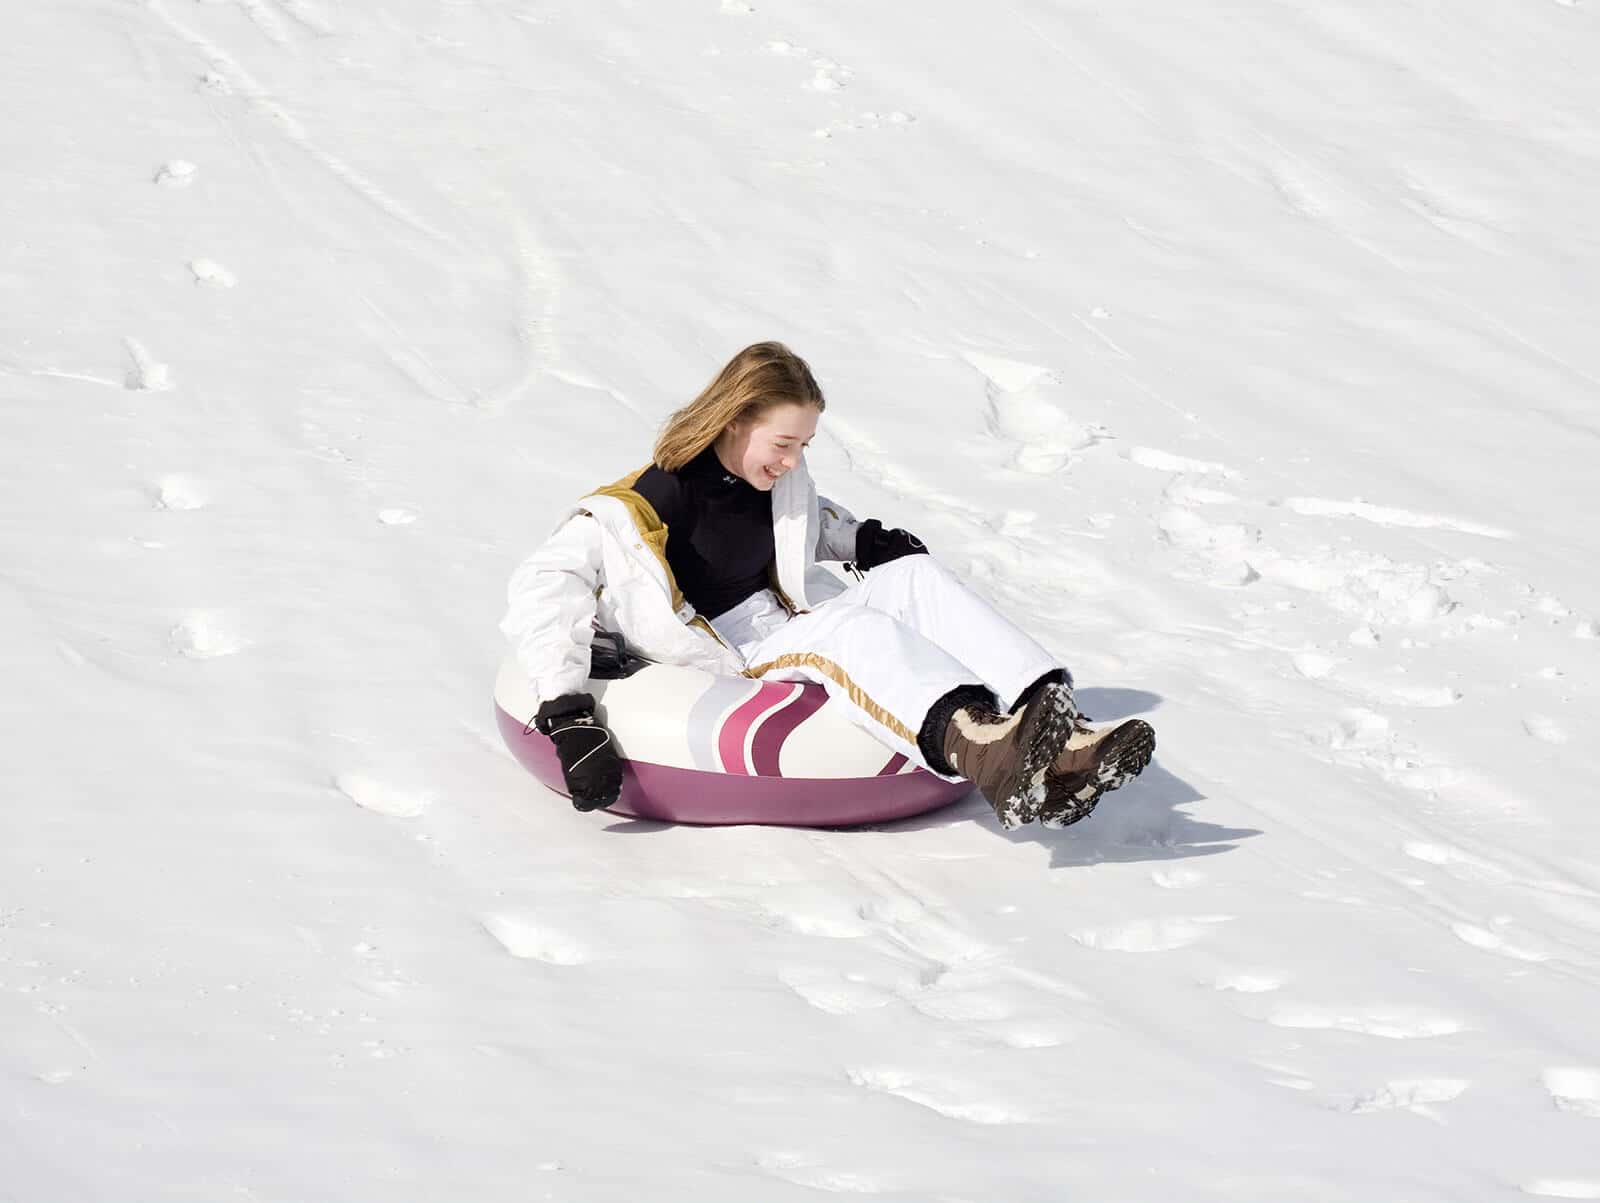 Young girl sledding down a hill